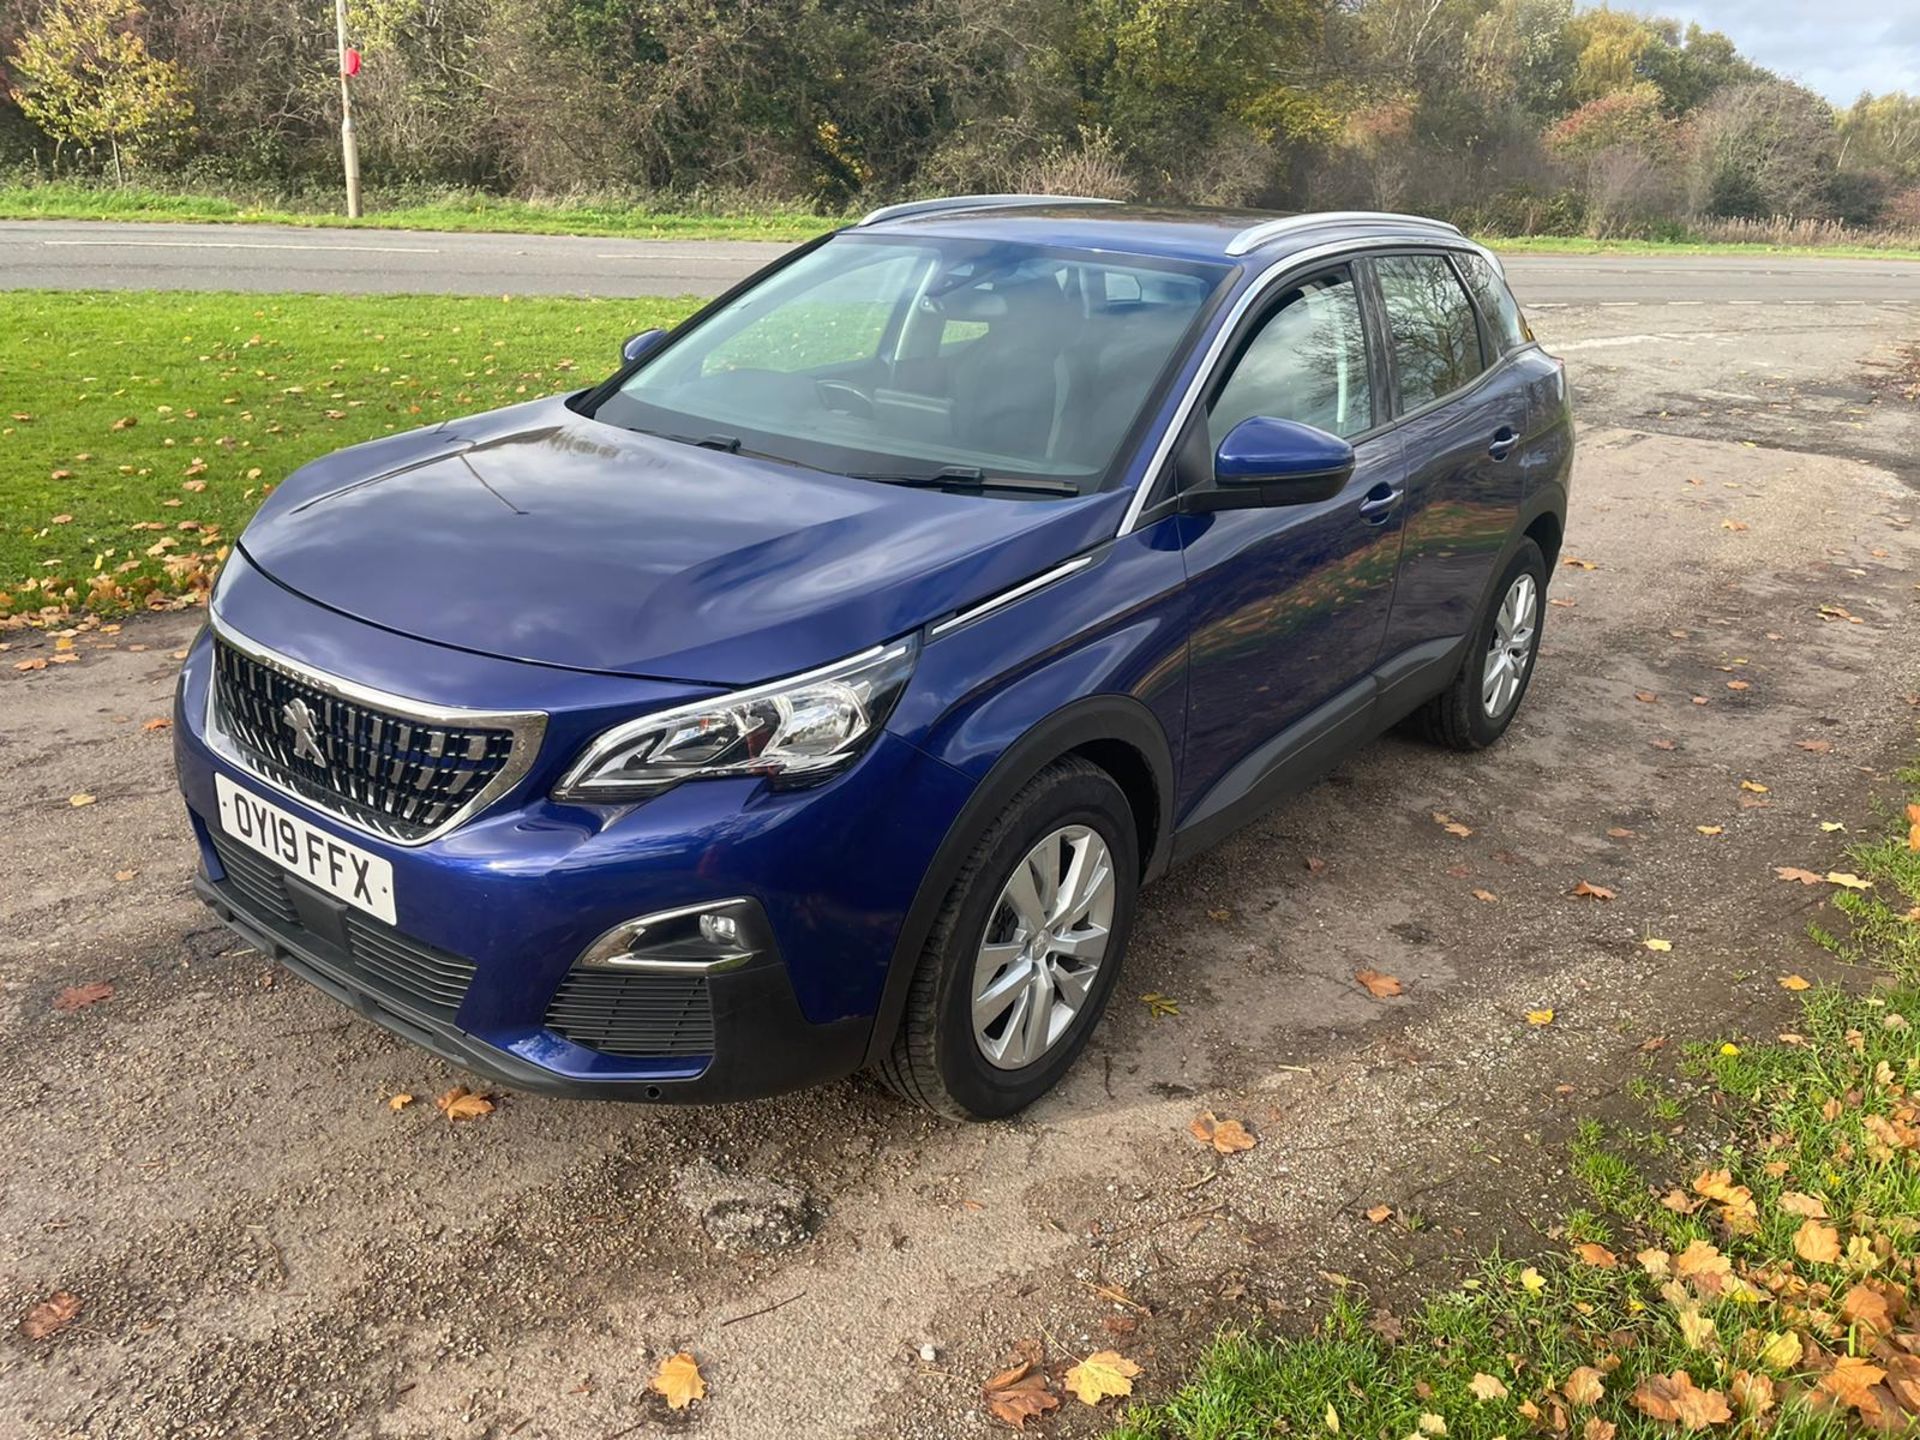 2019/19 REG PEUGEOT 3008 ACTIVE BLUEHDI S/S AUTO 1.5 DIESEL AUTOMATIC, SHOWING 1 FORMER KEEPER - Image 3 of 21